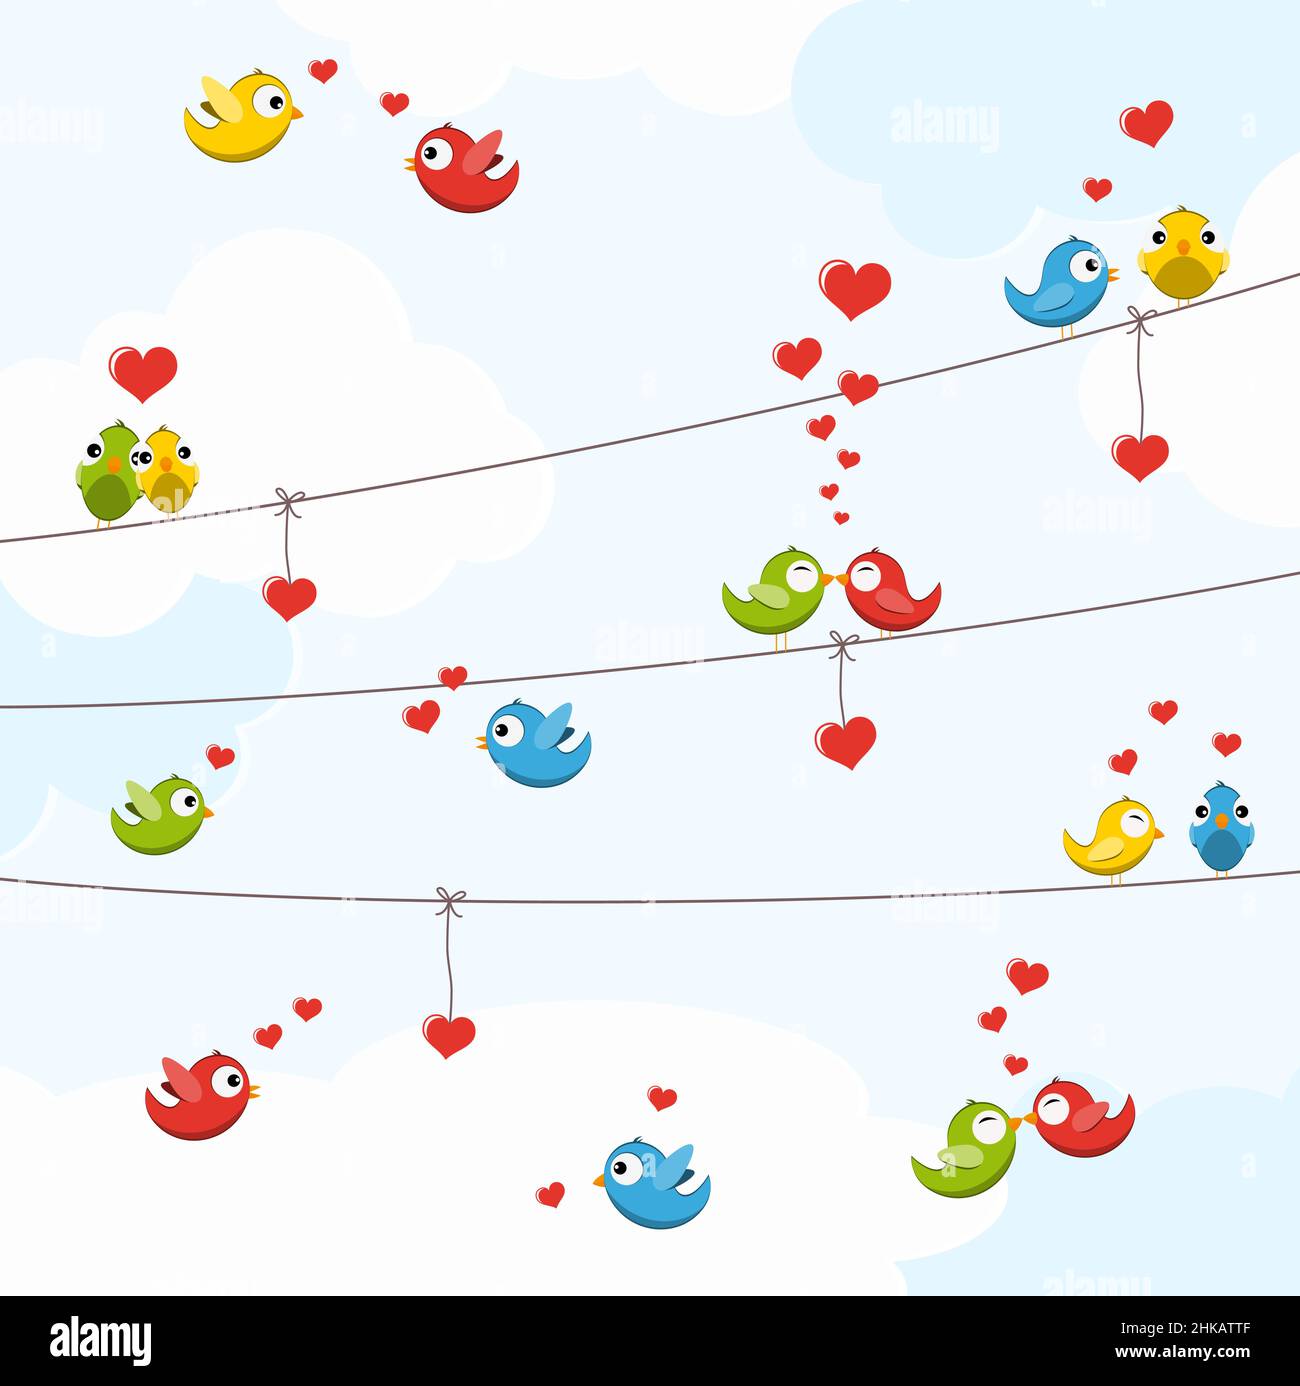 eps vector file with colored birds in love, sitting on strings, spring time, hanging hearts, background with sky and light clouds Stock Vector